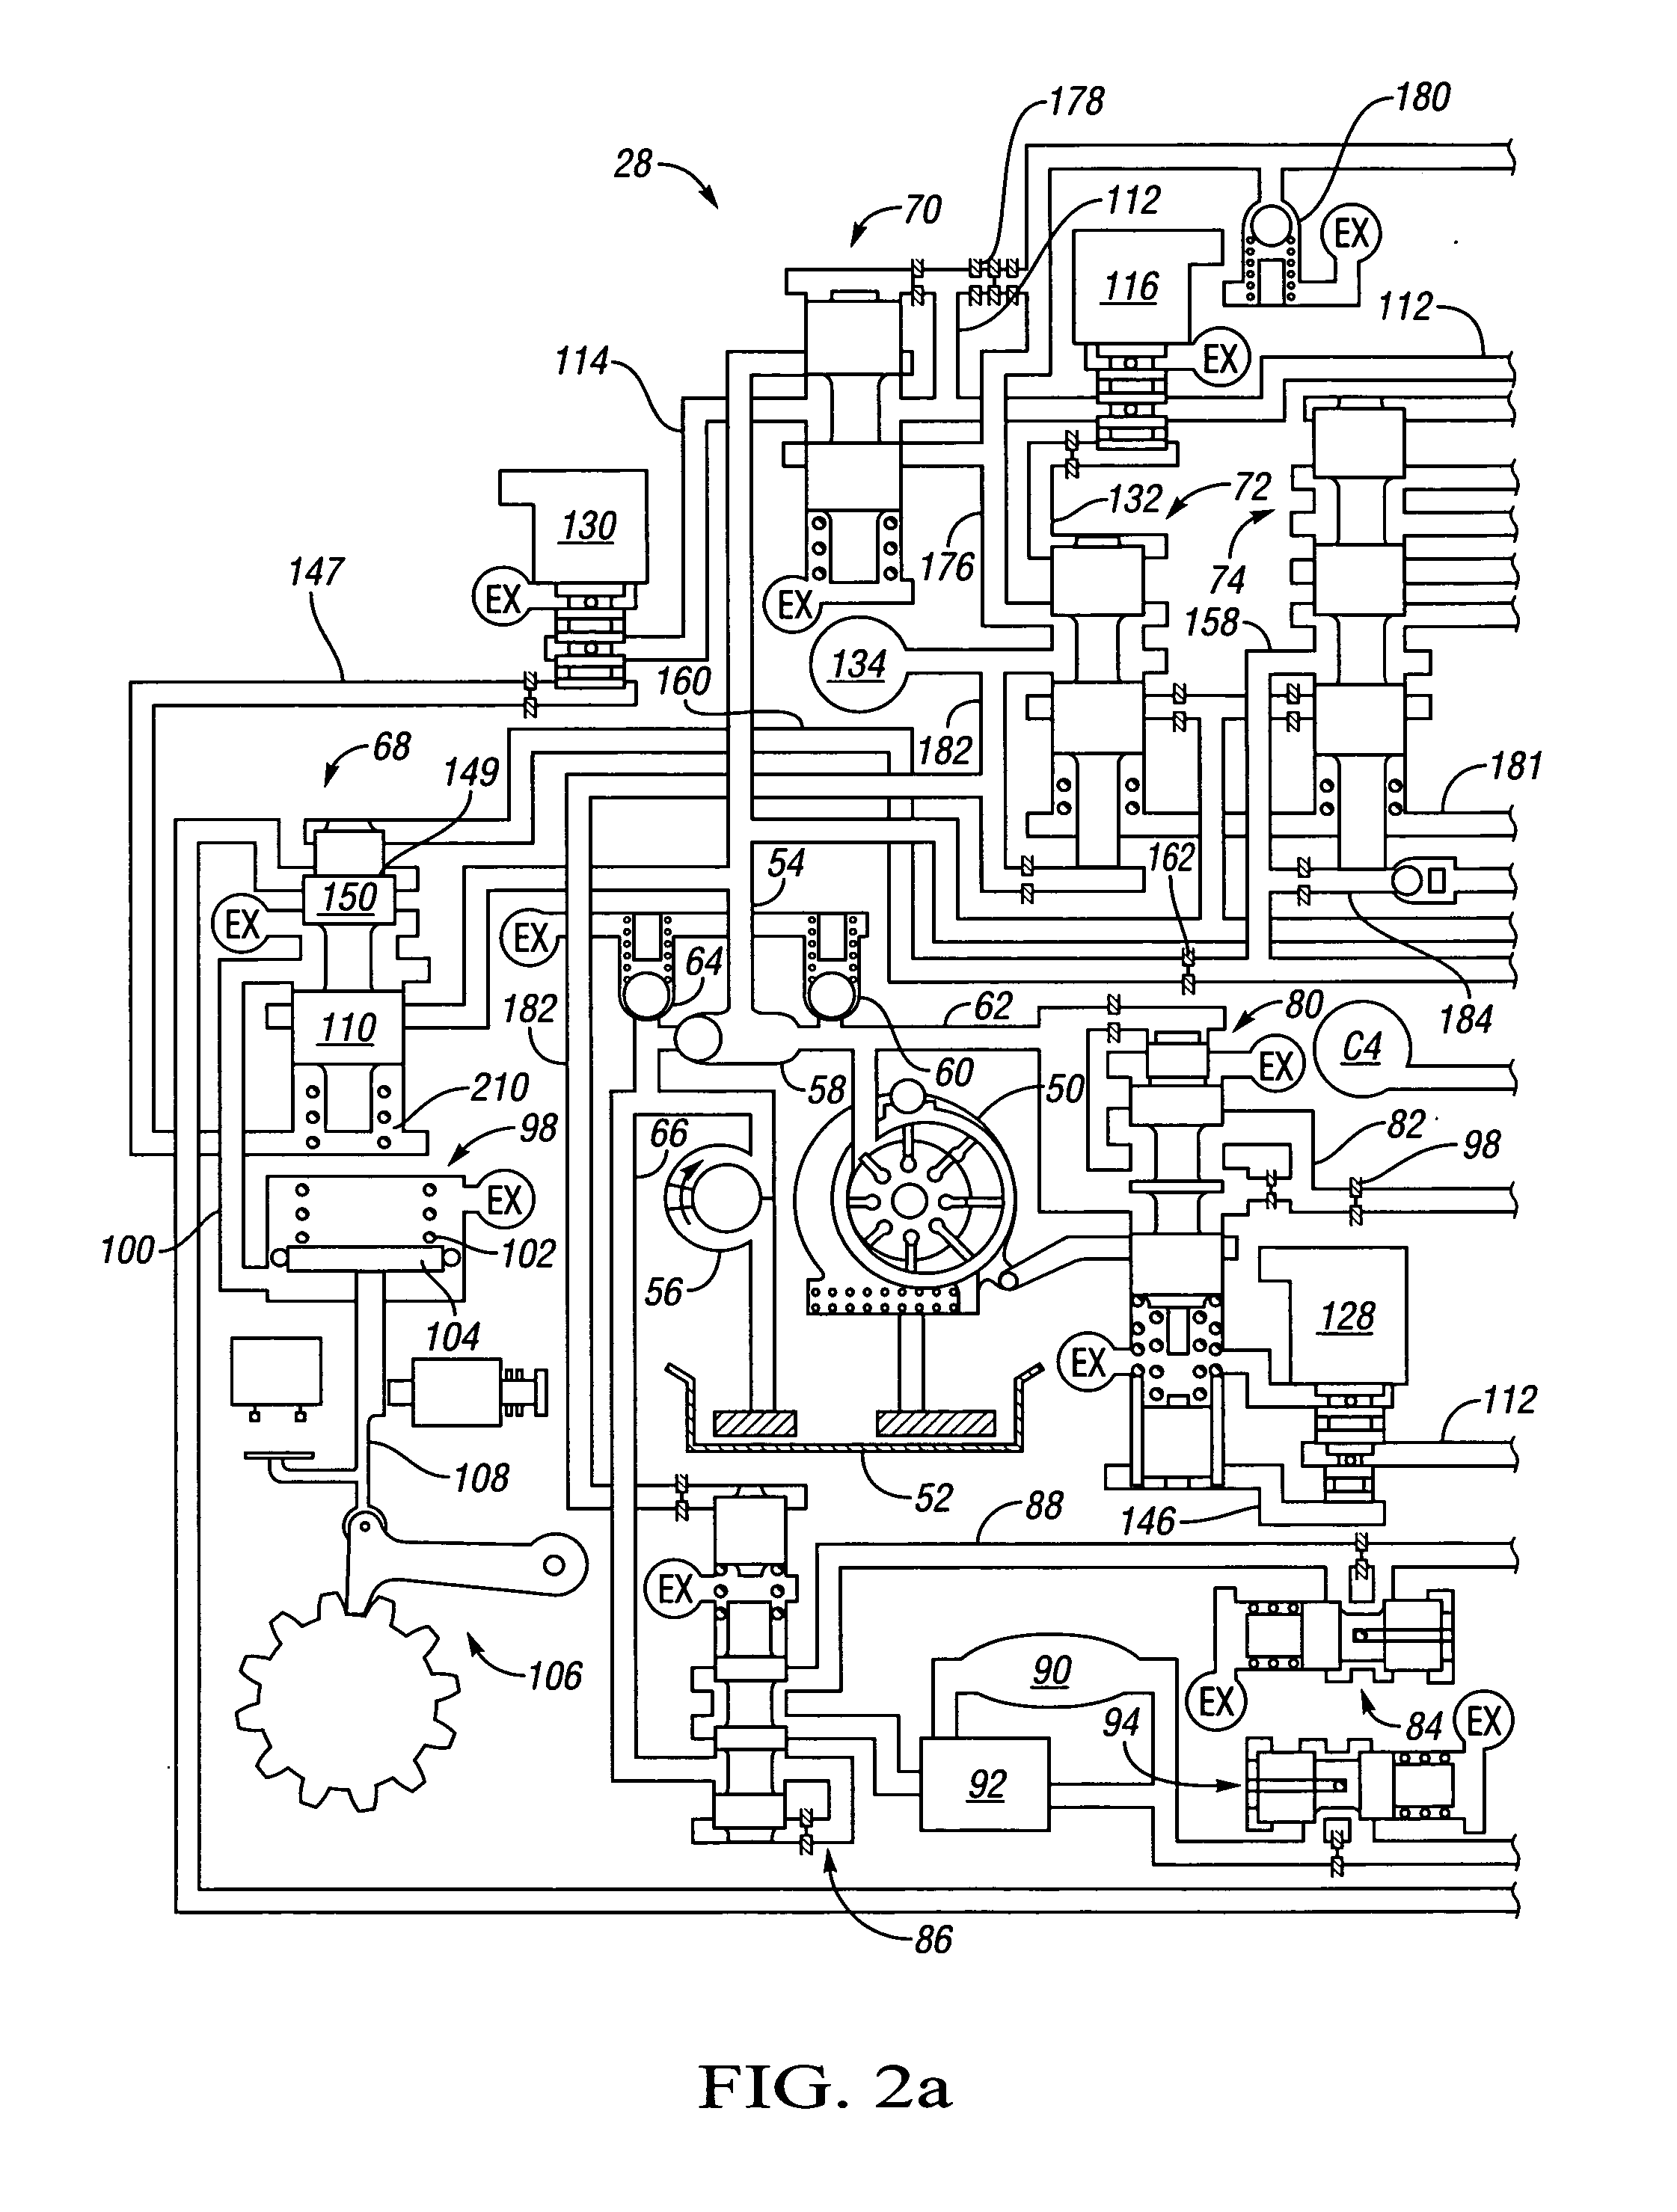 Multiplexed pressure switch system for an electrically variable hybrid transmission